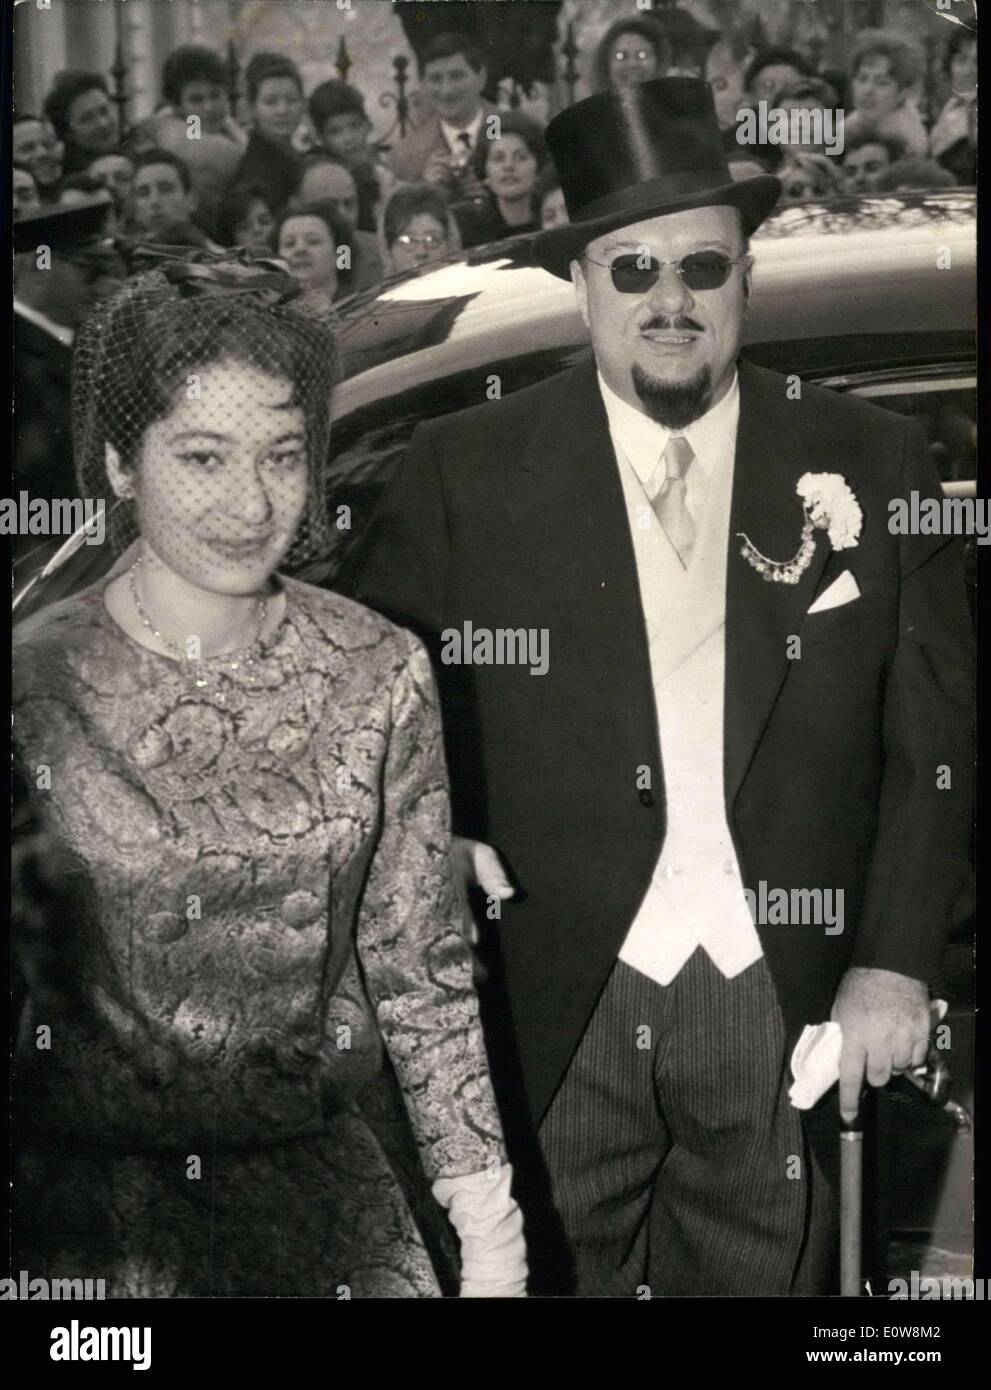 Jan. 22, 1962 - After the civil marriage on Saturday, the religious ceremony for former King Simeon of Bulgaria and Dona Margarita Gomez Aceba and Cehuela was held yesterday morning in the Russian church according to orthodox rituals. Picture: King Farouk of Egypt and his daughter Fawzia arriving to the ceremony. Stock Photo